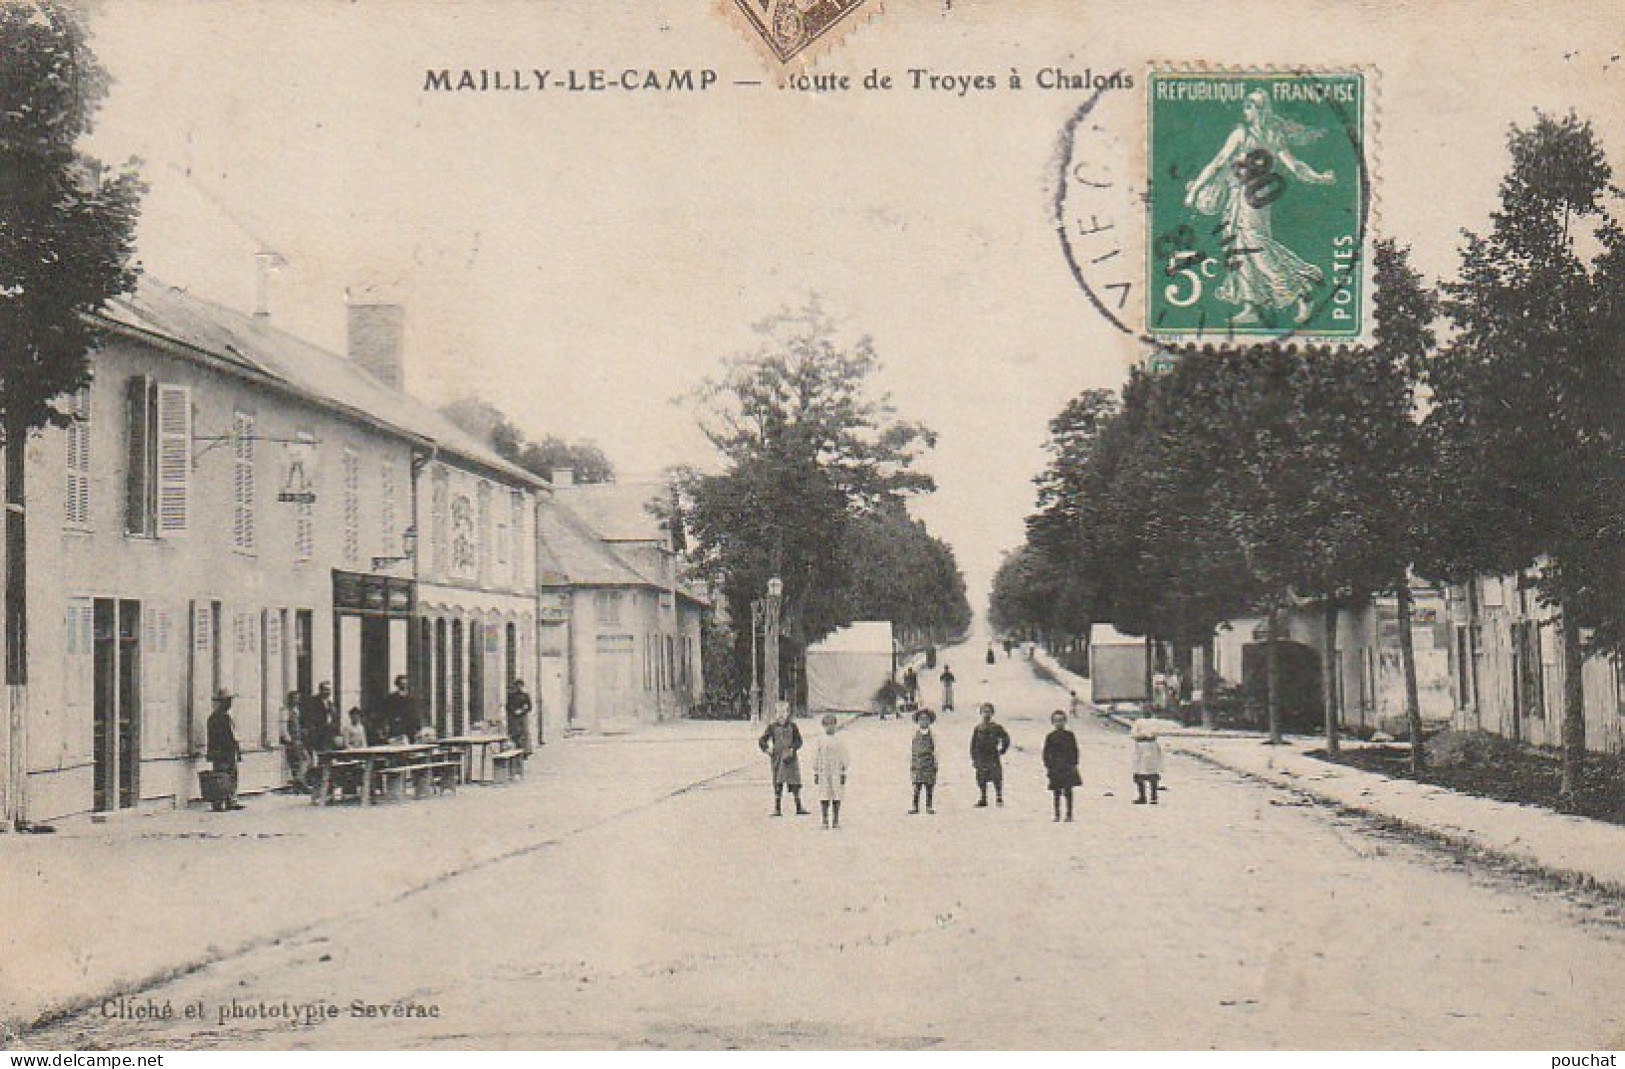 OP 16-(10) MAILLY LE CAMP - ROUTE DE TROYES A CHALONS  - ENFANTS - HOTEL - 2 SCANS - Mailly-le-Camp